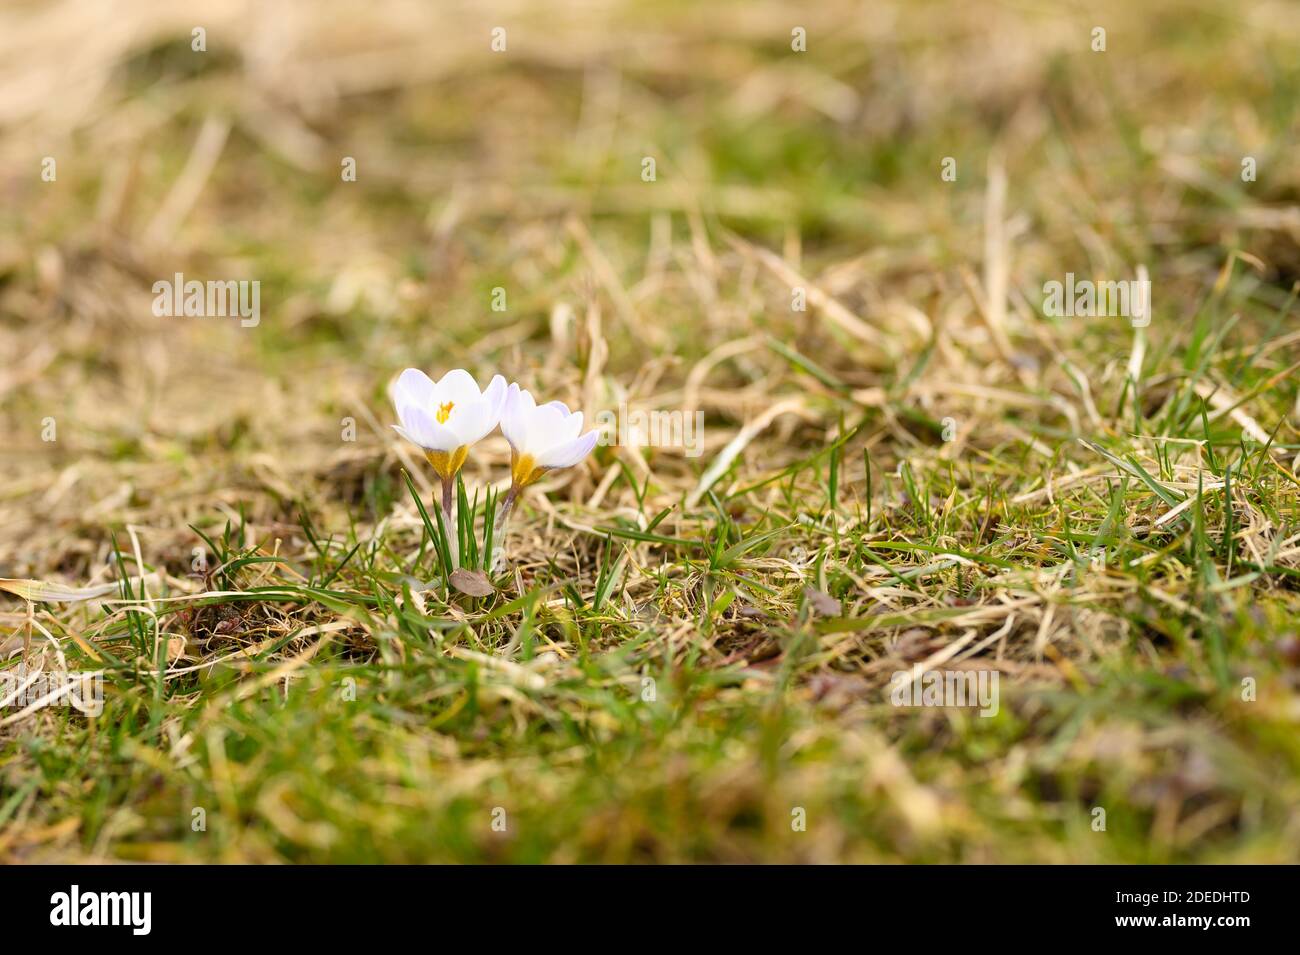 flowers crocuses in full blossom, white lilac color, grow on the withered grass. the first spring flowers in nature outdoor Stock Photo